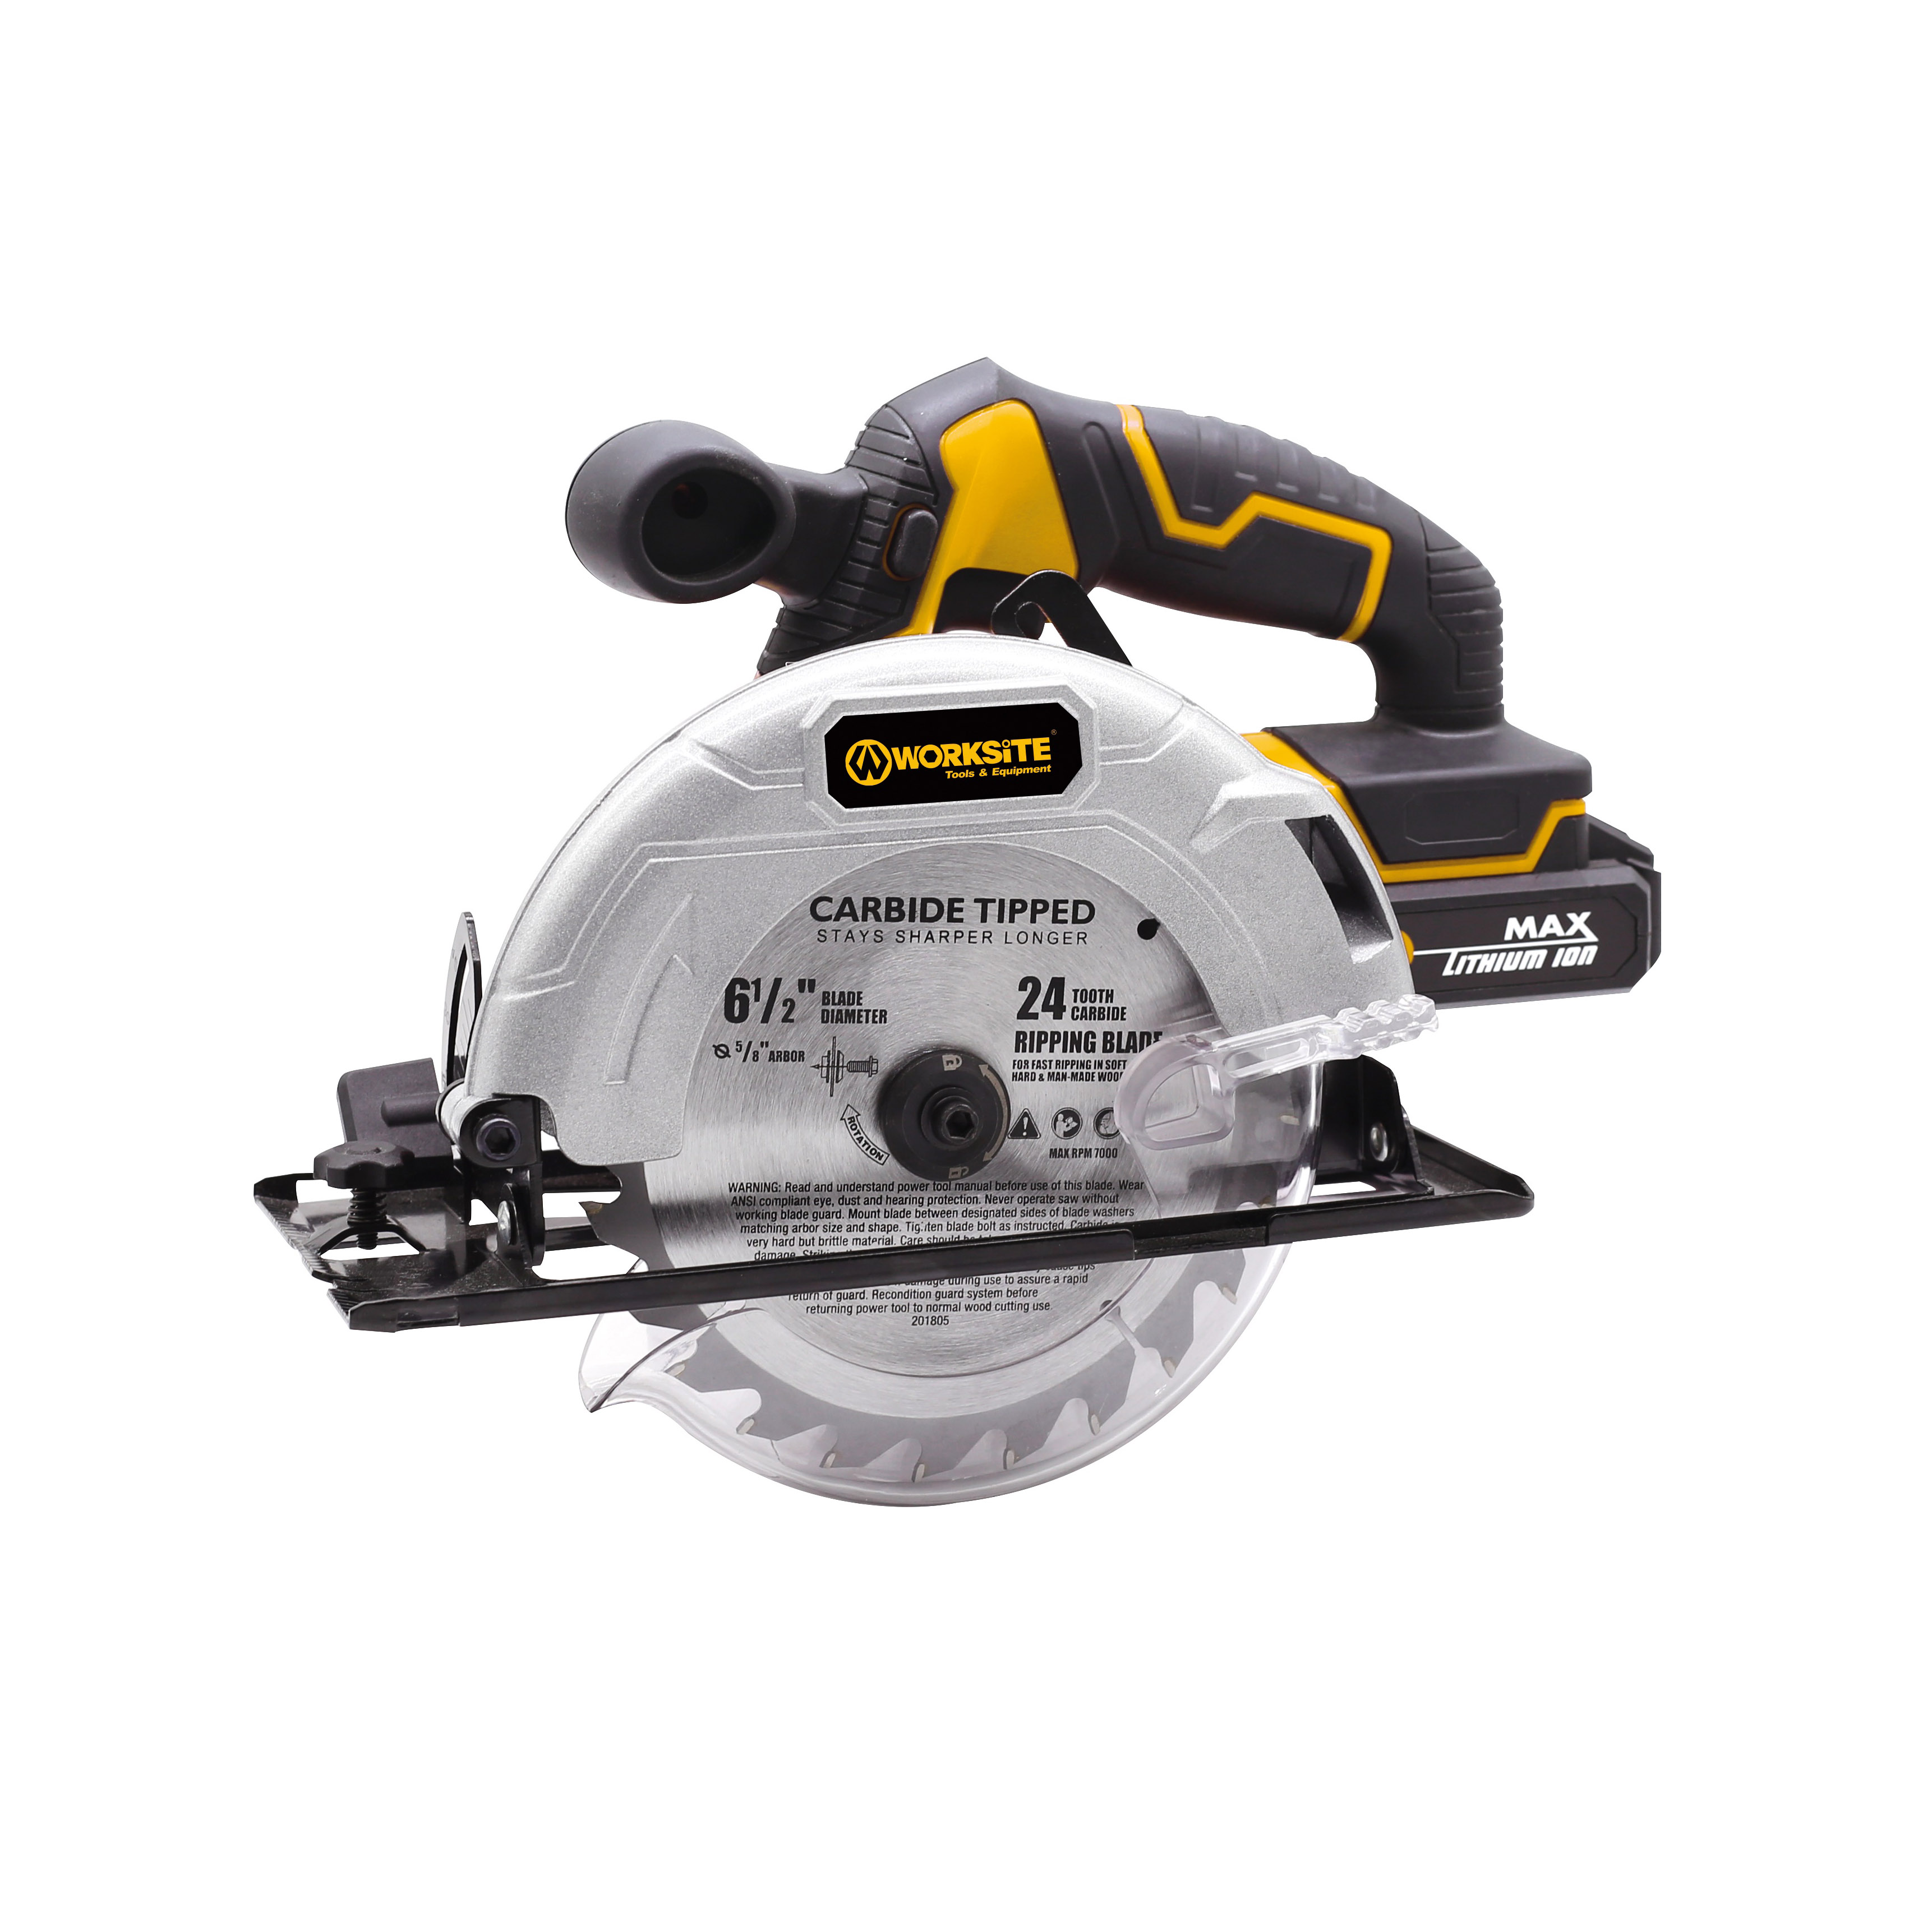 Worksite Cordless Circular Saw 165mm 61/2" CCS334 - Quincaillerie A1's Online Store